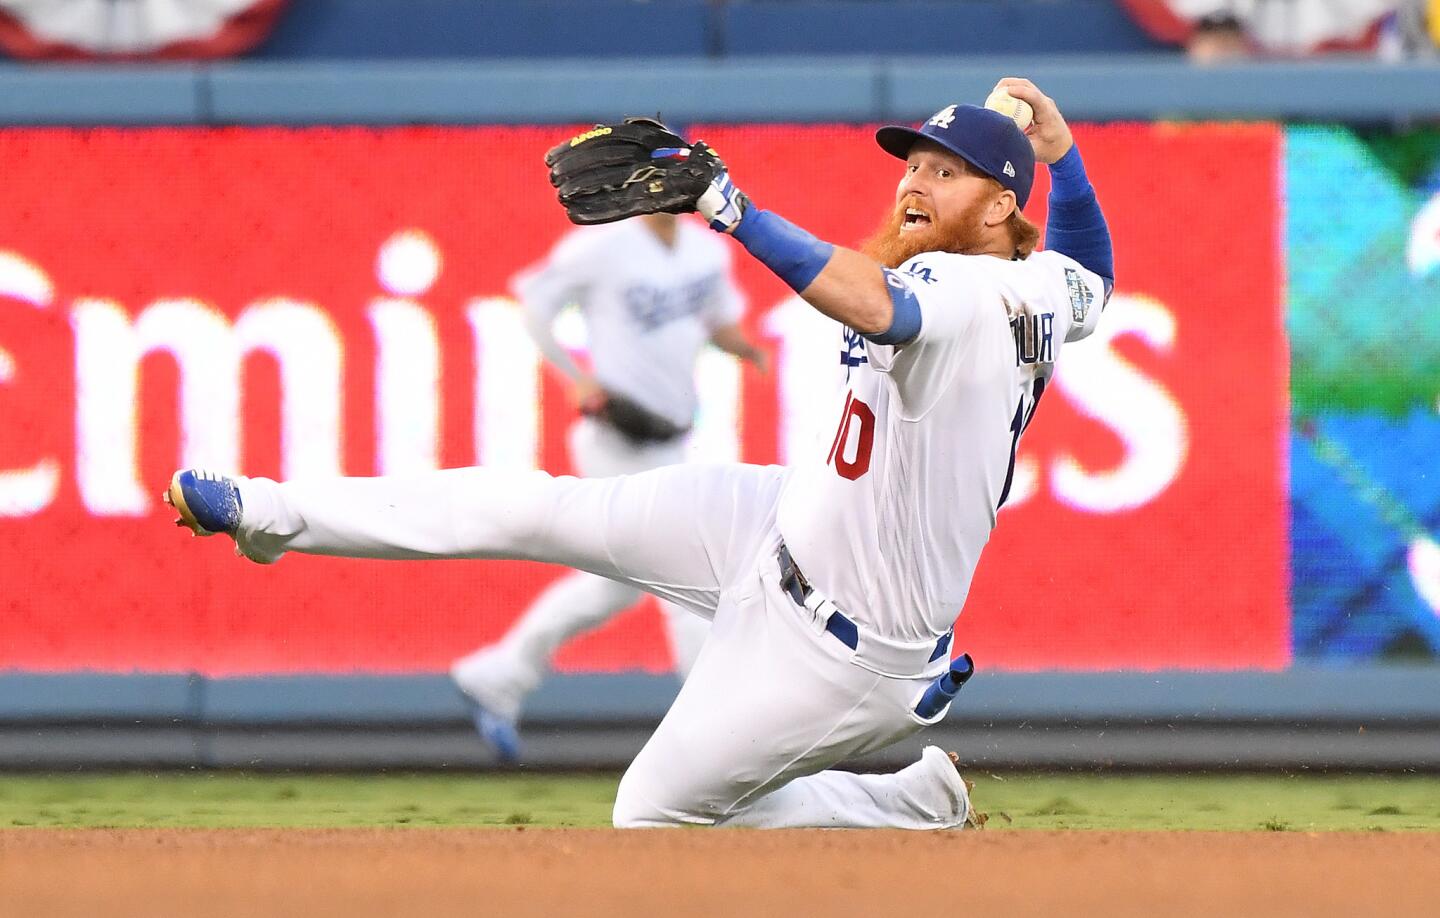 Dodgers Justin Turner fields the ball but can't throw out Red Sox hitter Jackie Bradley Jr. in the 3rd inning.